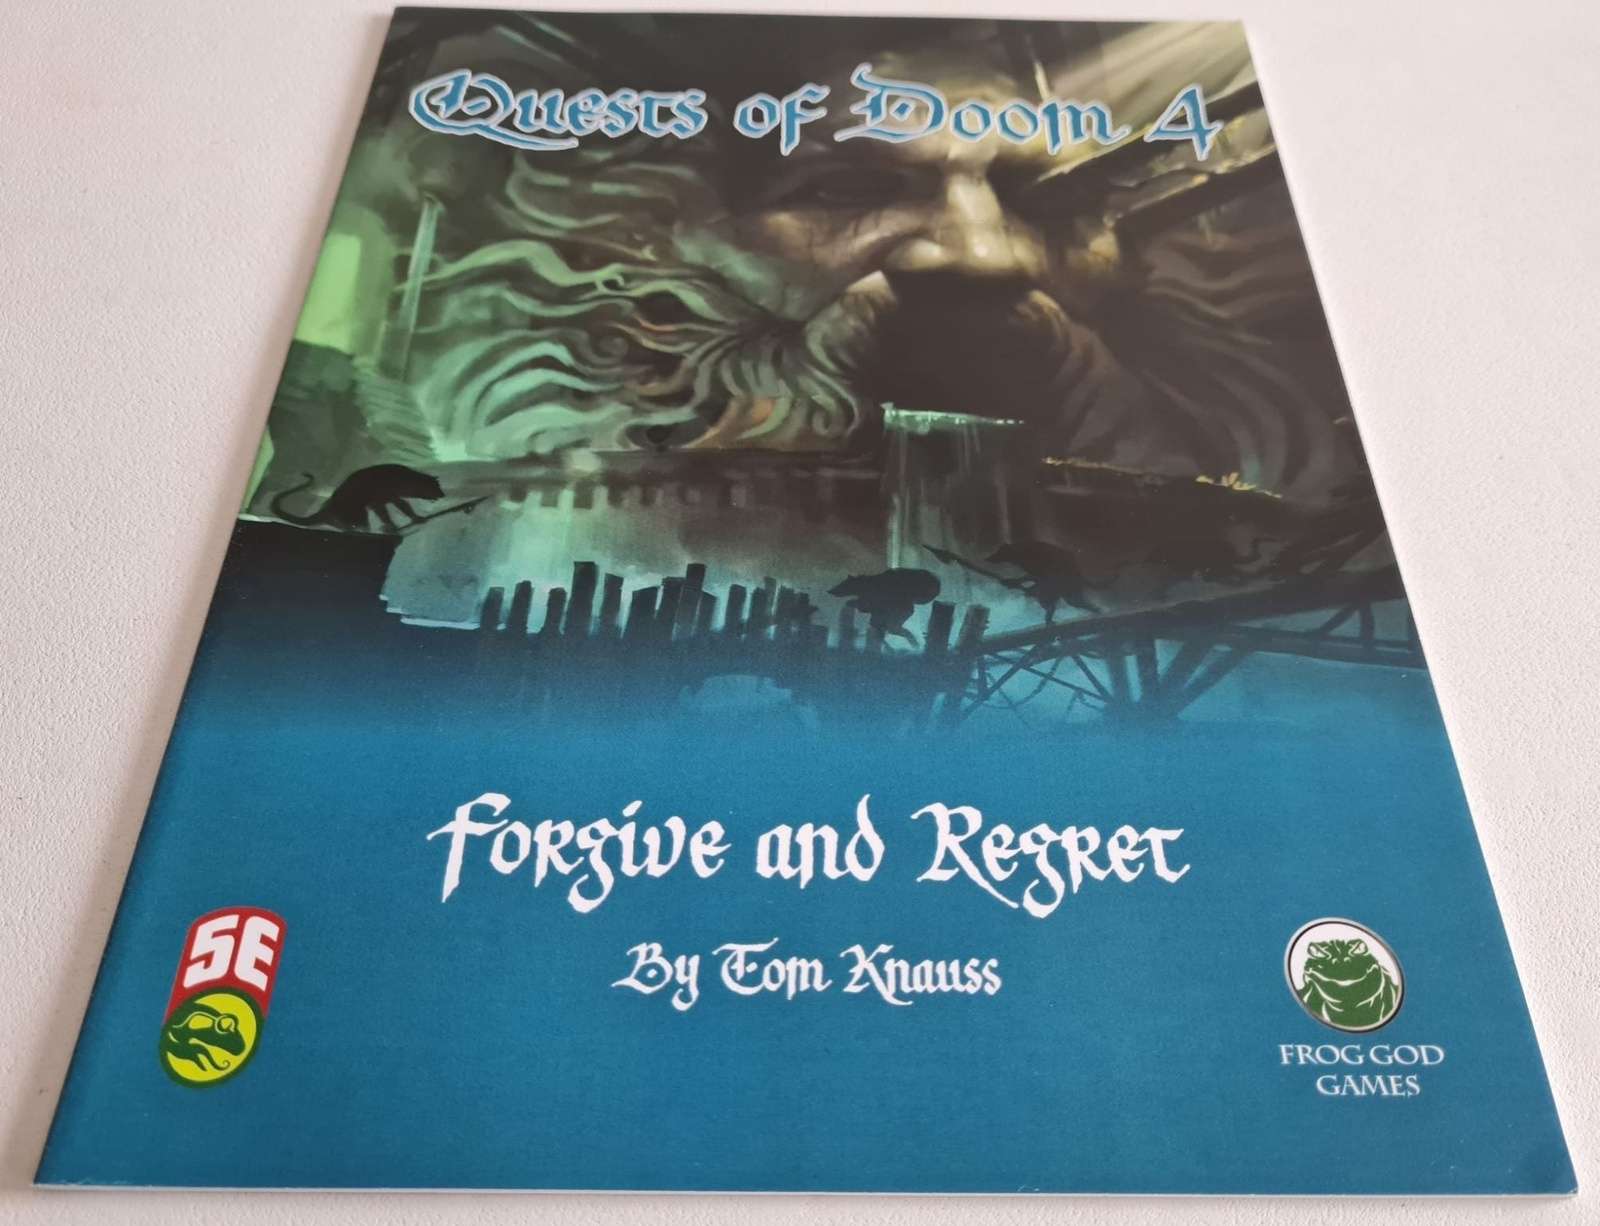 Quests of Doom 4: Forgive and Regret - Dungeons and Dragons 5th Edition (5e) Default Title